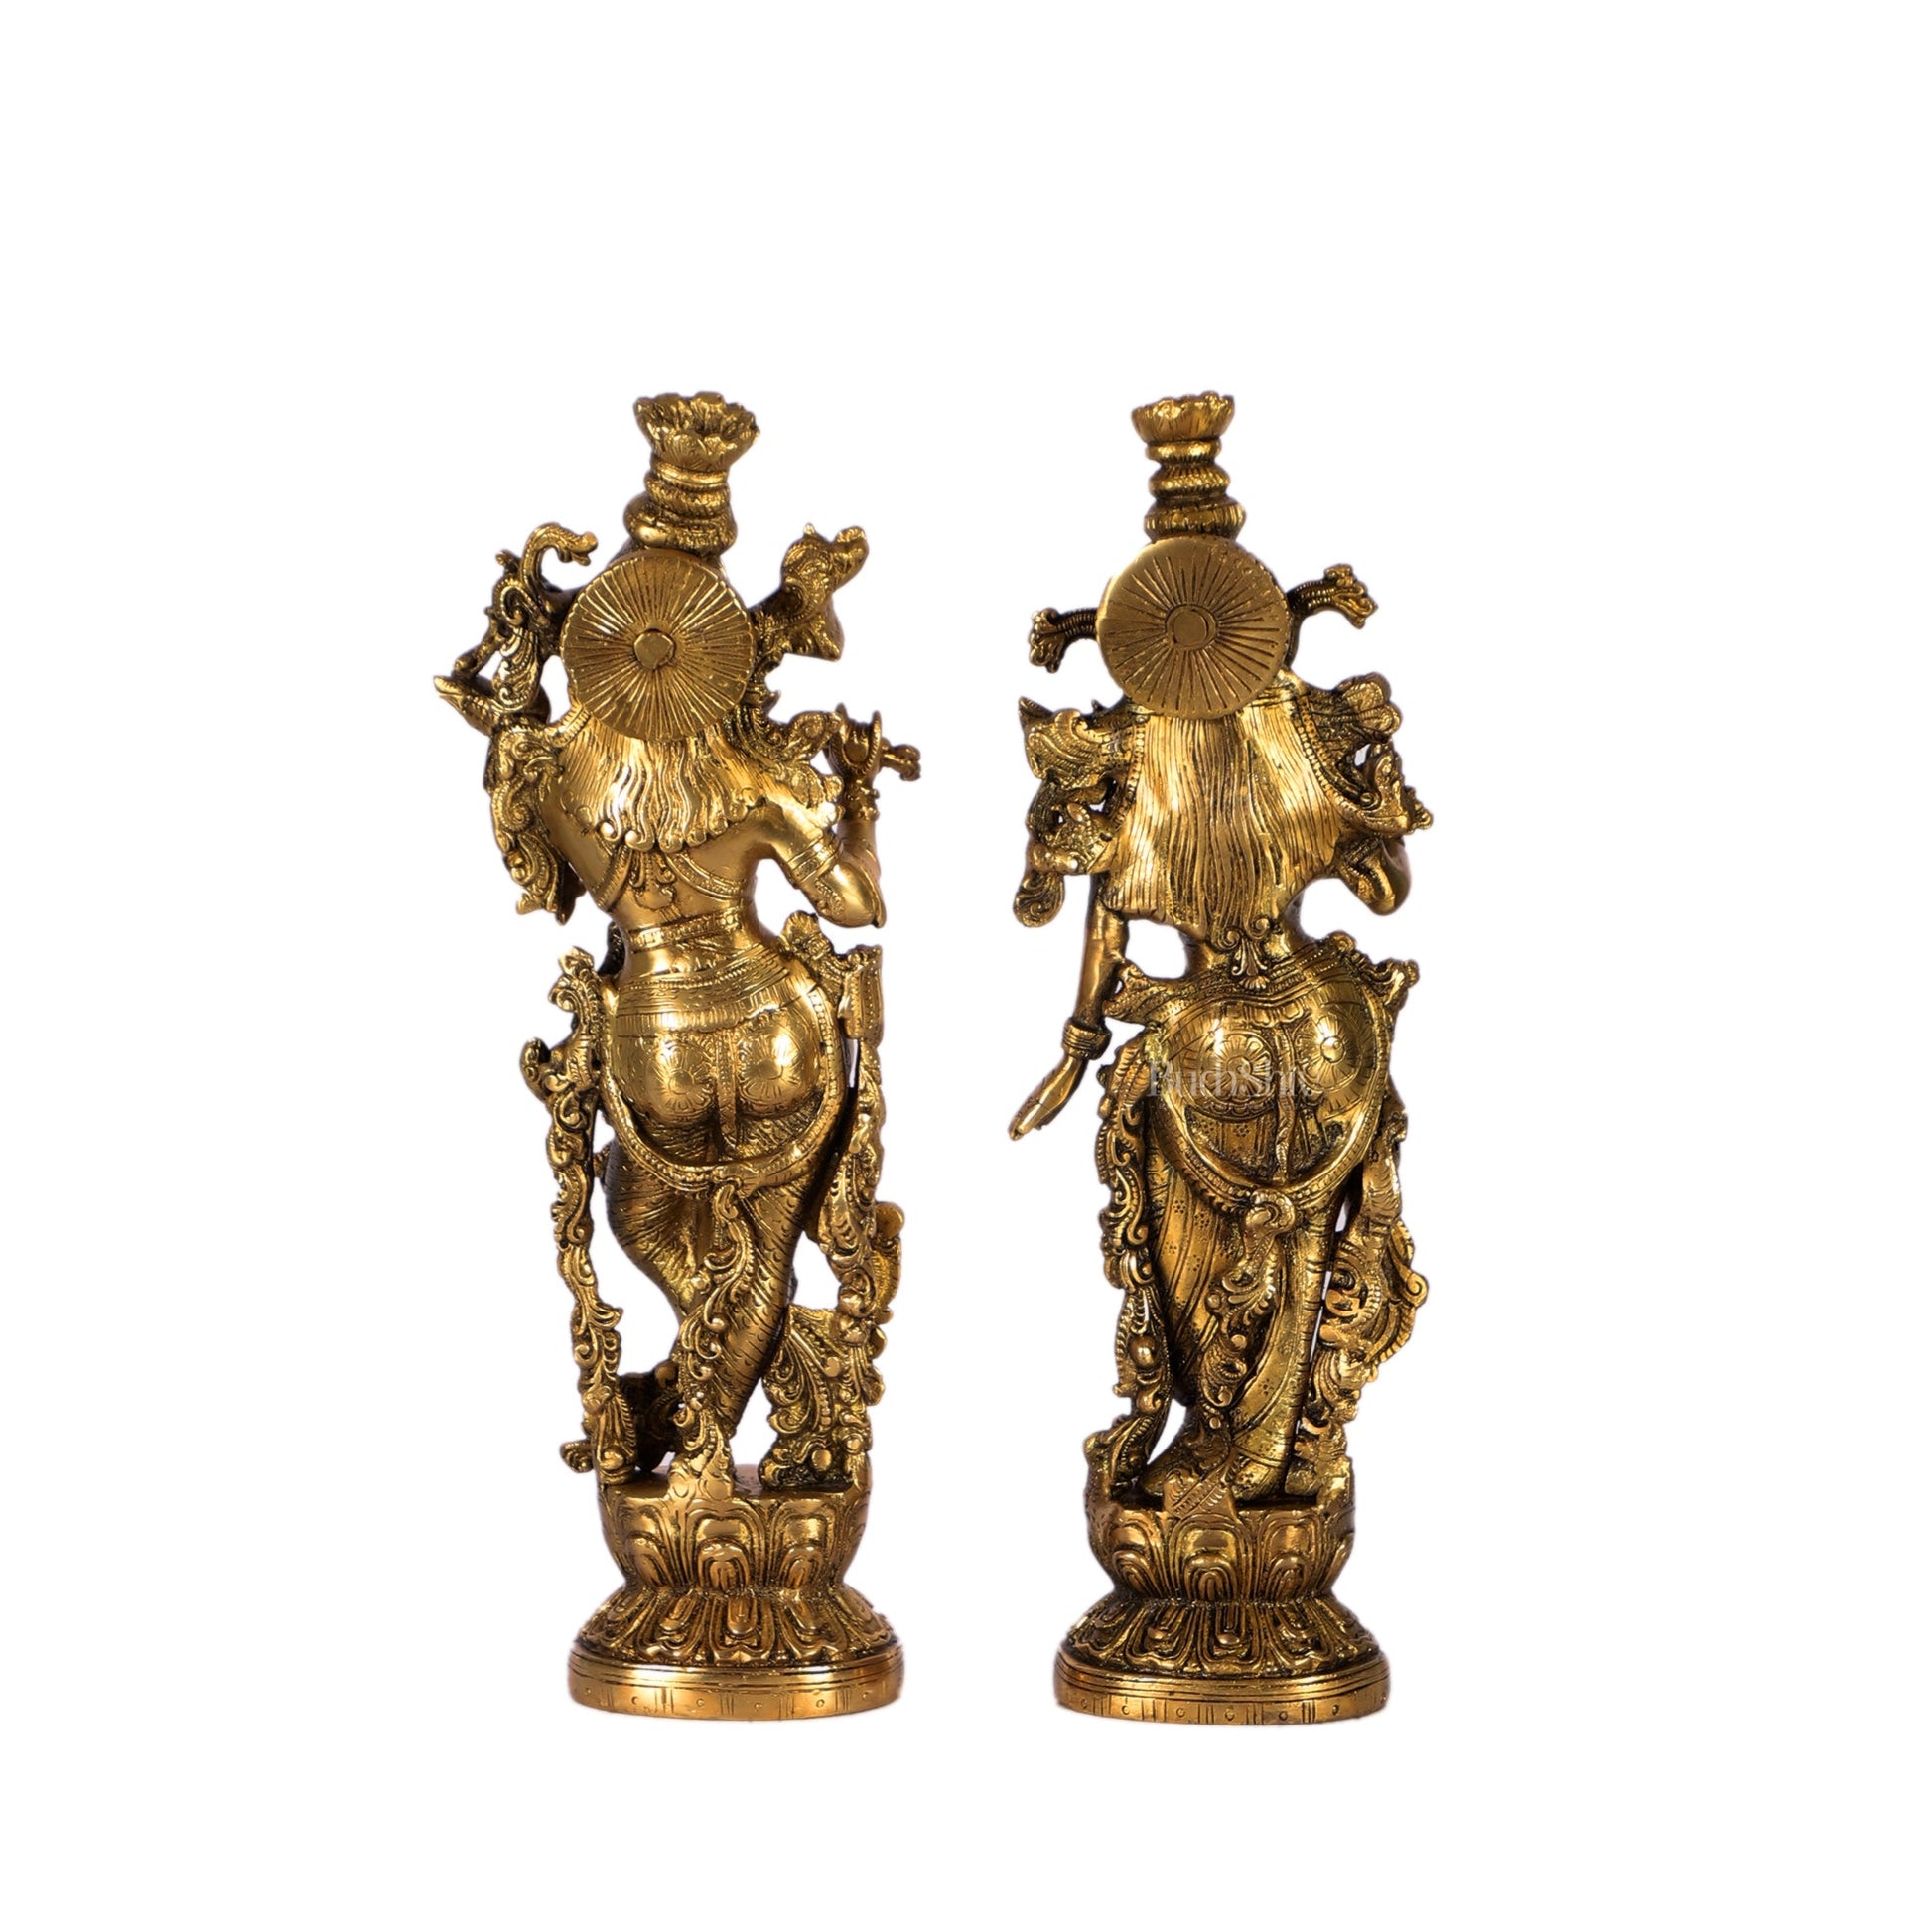 Pure Brass Superfine Radha Krishna Statues - 14" Height | Finely Carved - Budhshiv.com